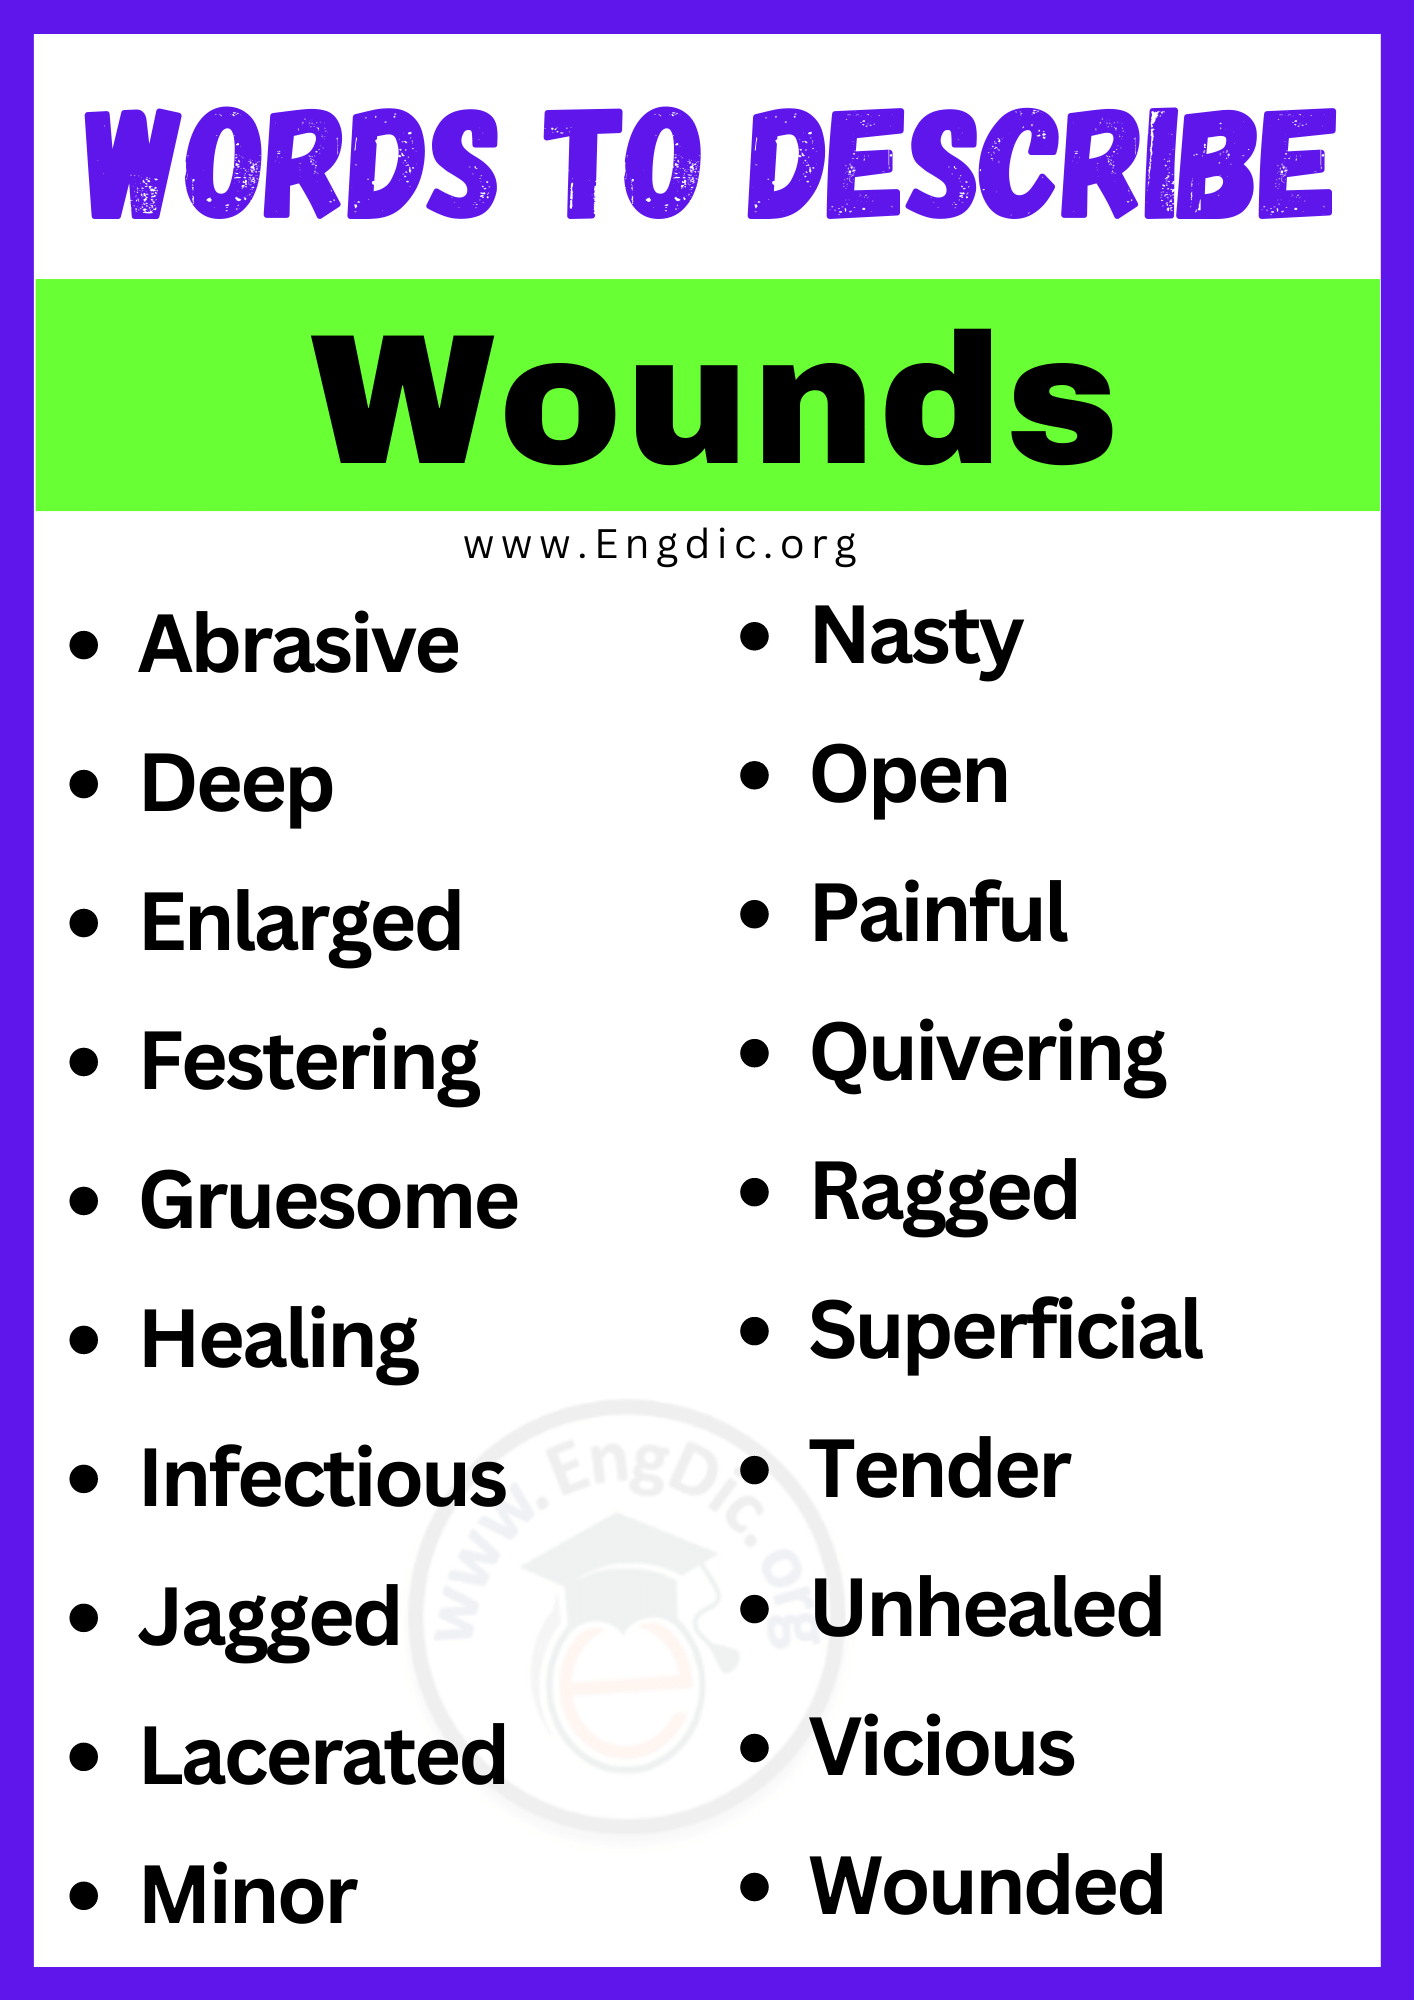 Words to Describe Wounds